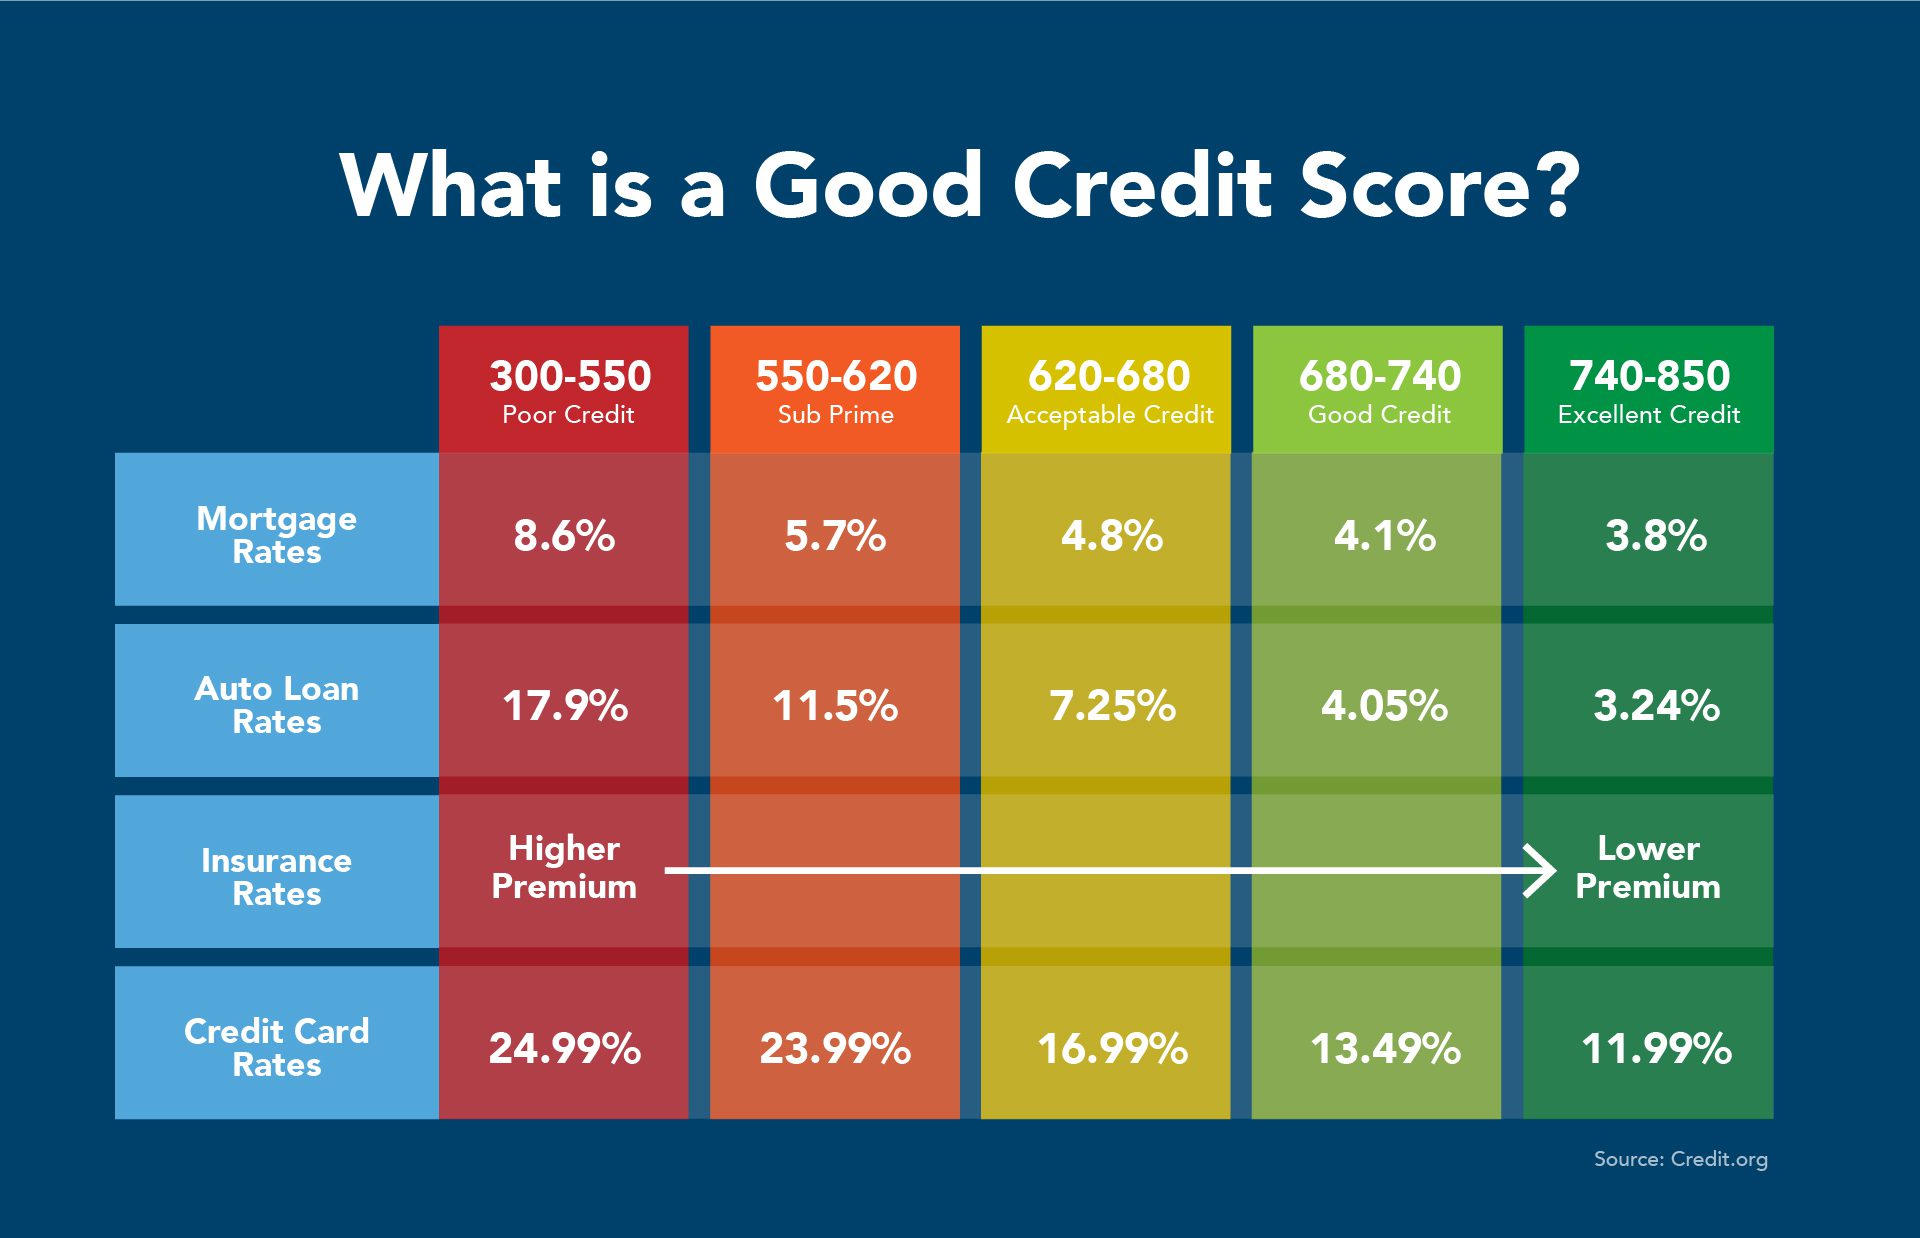 Chase Sapphire Reserve Credit Score: What Score Do You Need?